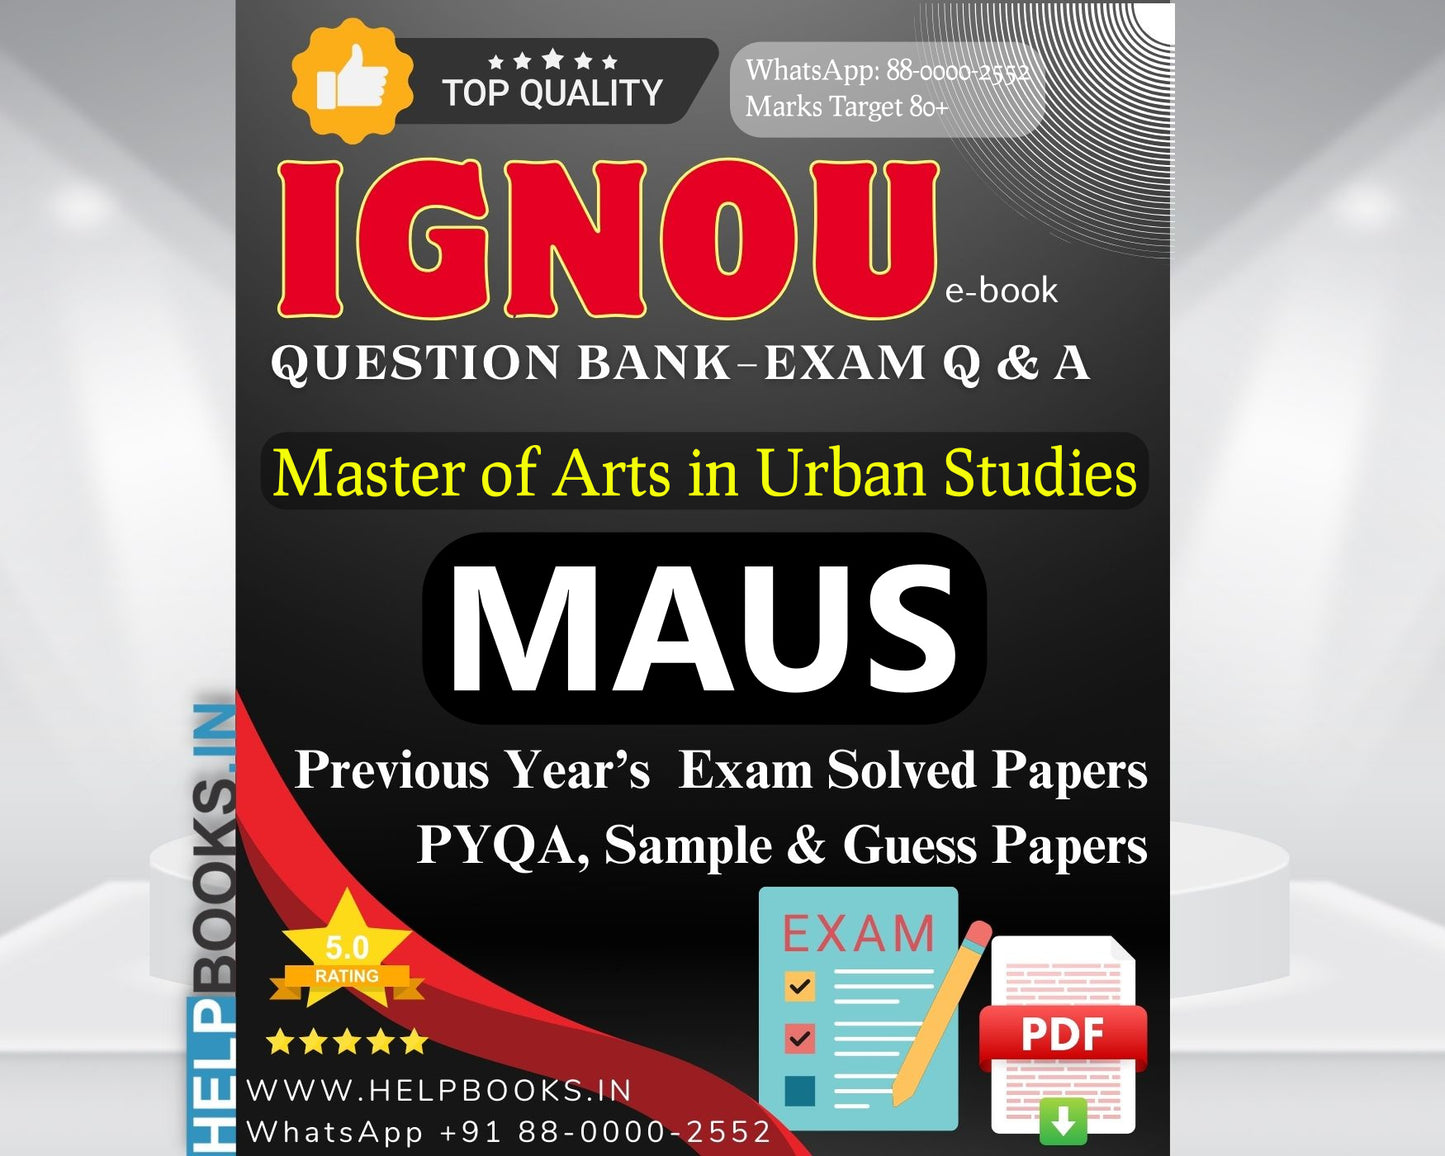 MAUS IGNOU Exam Combo of 10 Solved Papers: 5 Previous Years' Solved Papers & 5 Sample Guess Papers for Master of Arts Urban Studies